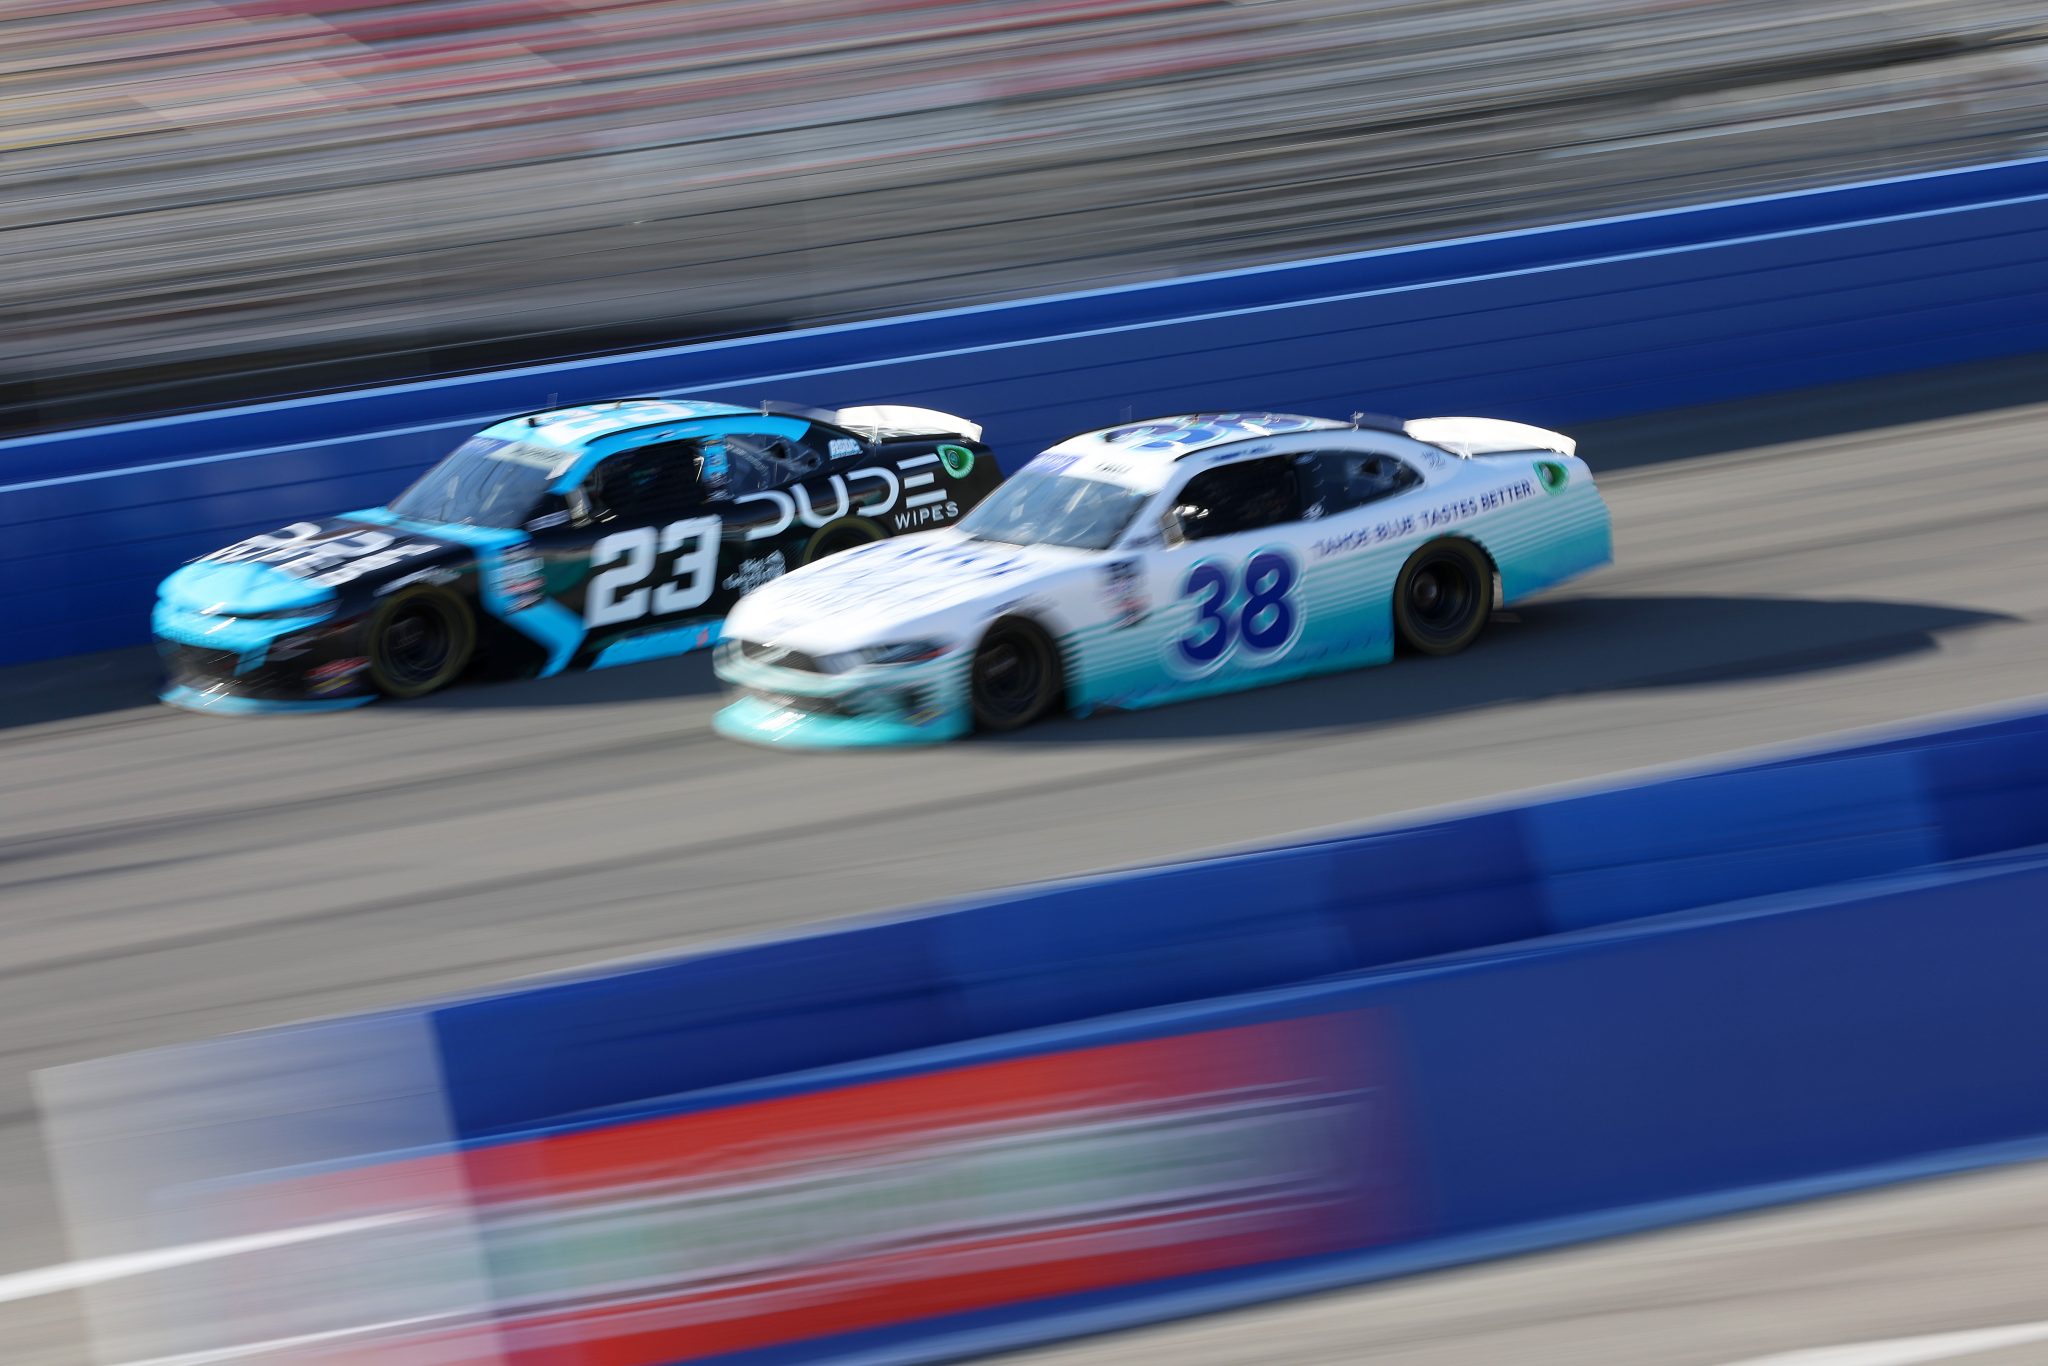 FONTANA, CALIFORNIA - FEBRUARY 26: Anthony Alfredo, driver of the #23 Dude Wipes Chevrolet, and Timmy Hill, driver of the #38 Tahoe Blue Vodka Ford, drive during practice for the NASCAR Xfinity Series Production Alliance 300 at Auto Club Speedway on February 26, 2022 in Fontana, California. (Photo by James Gilbert/Getty Images) | Getty Images